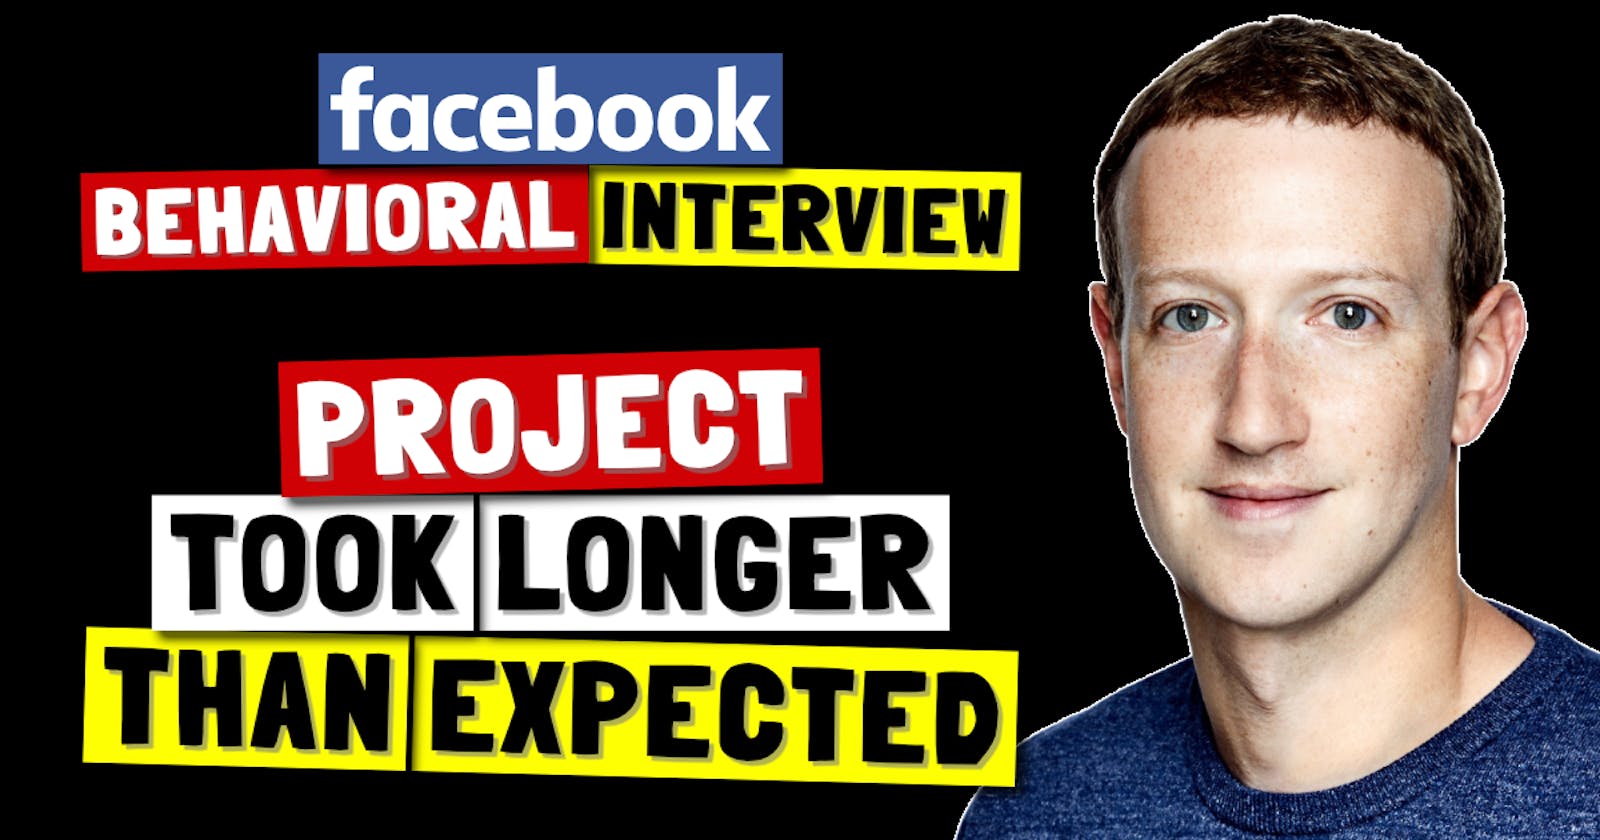 ✅ Tell Me About A Time Project Took Longer Than Expected | Facebook Behavioral Interview (Jedi) Series 🔥